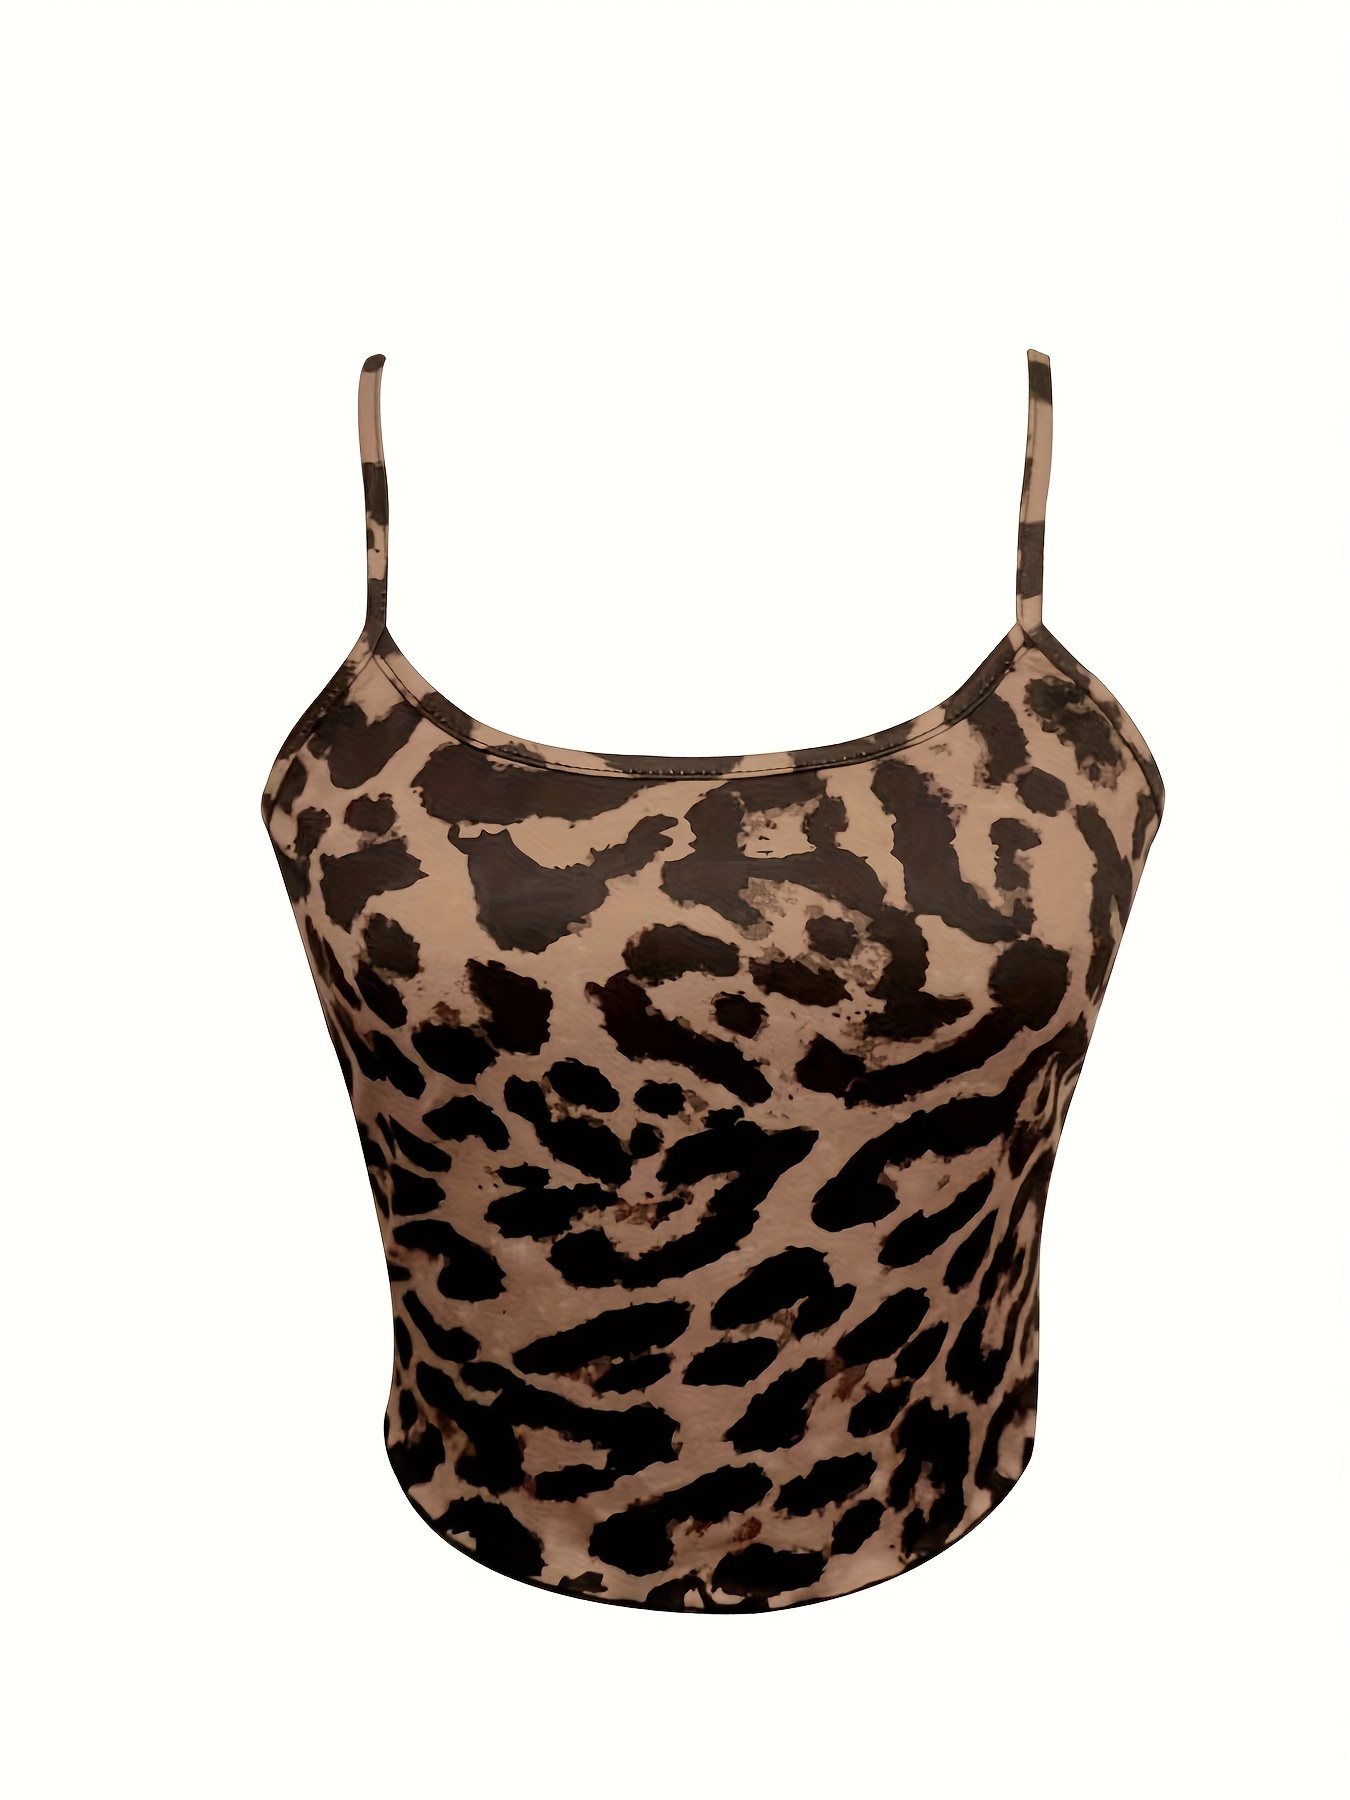 Sand Lace Bralette Camisole with Leopard Print Straps